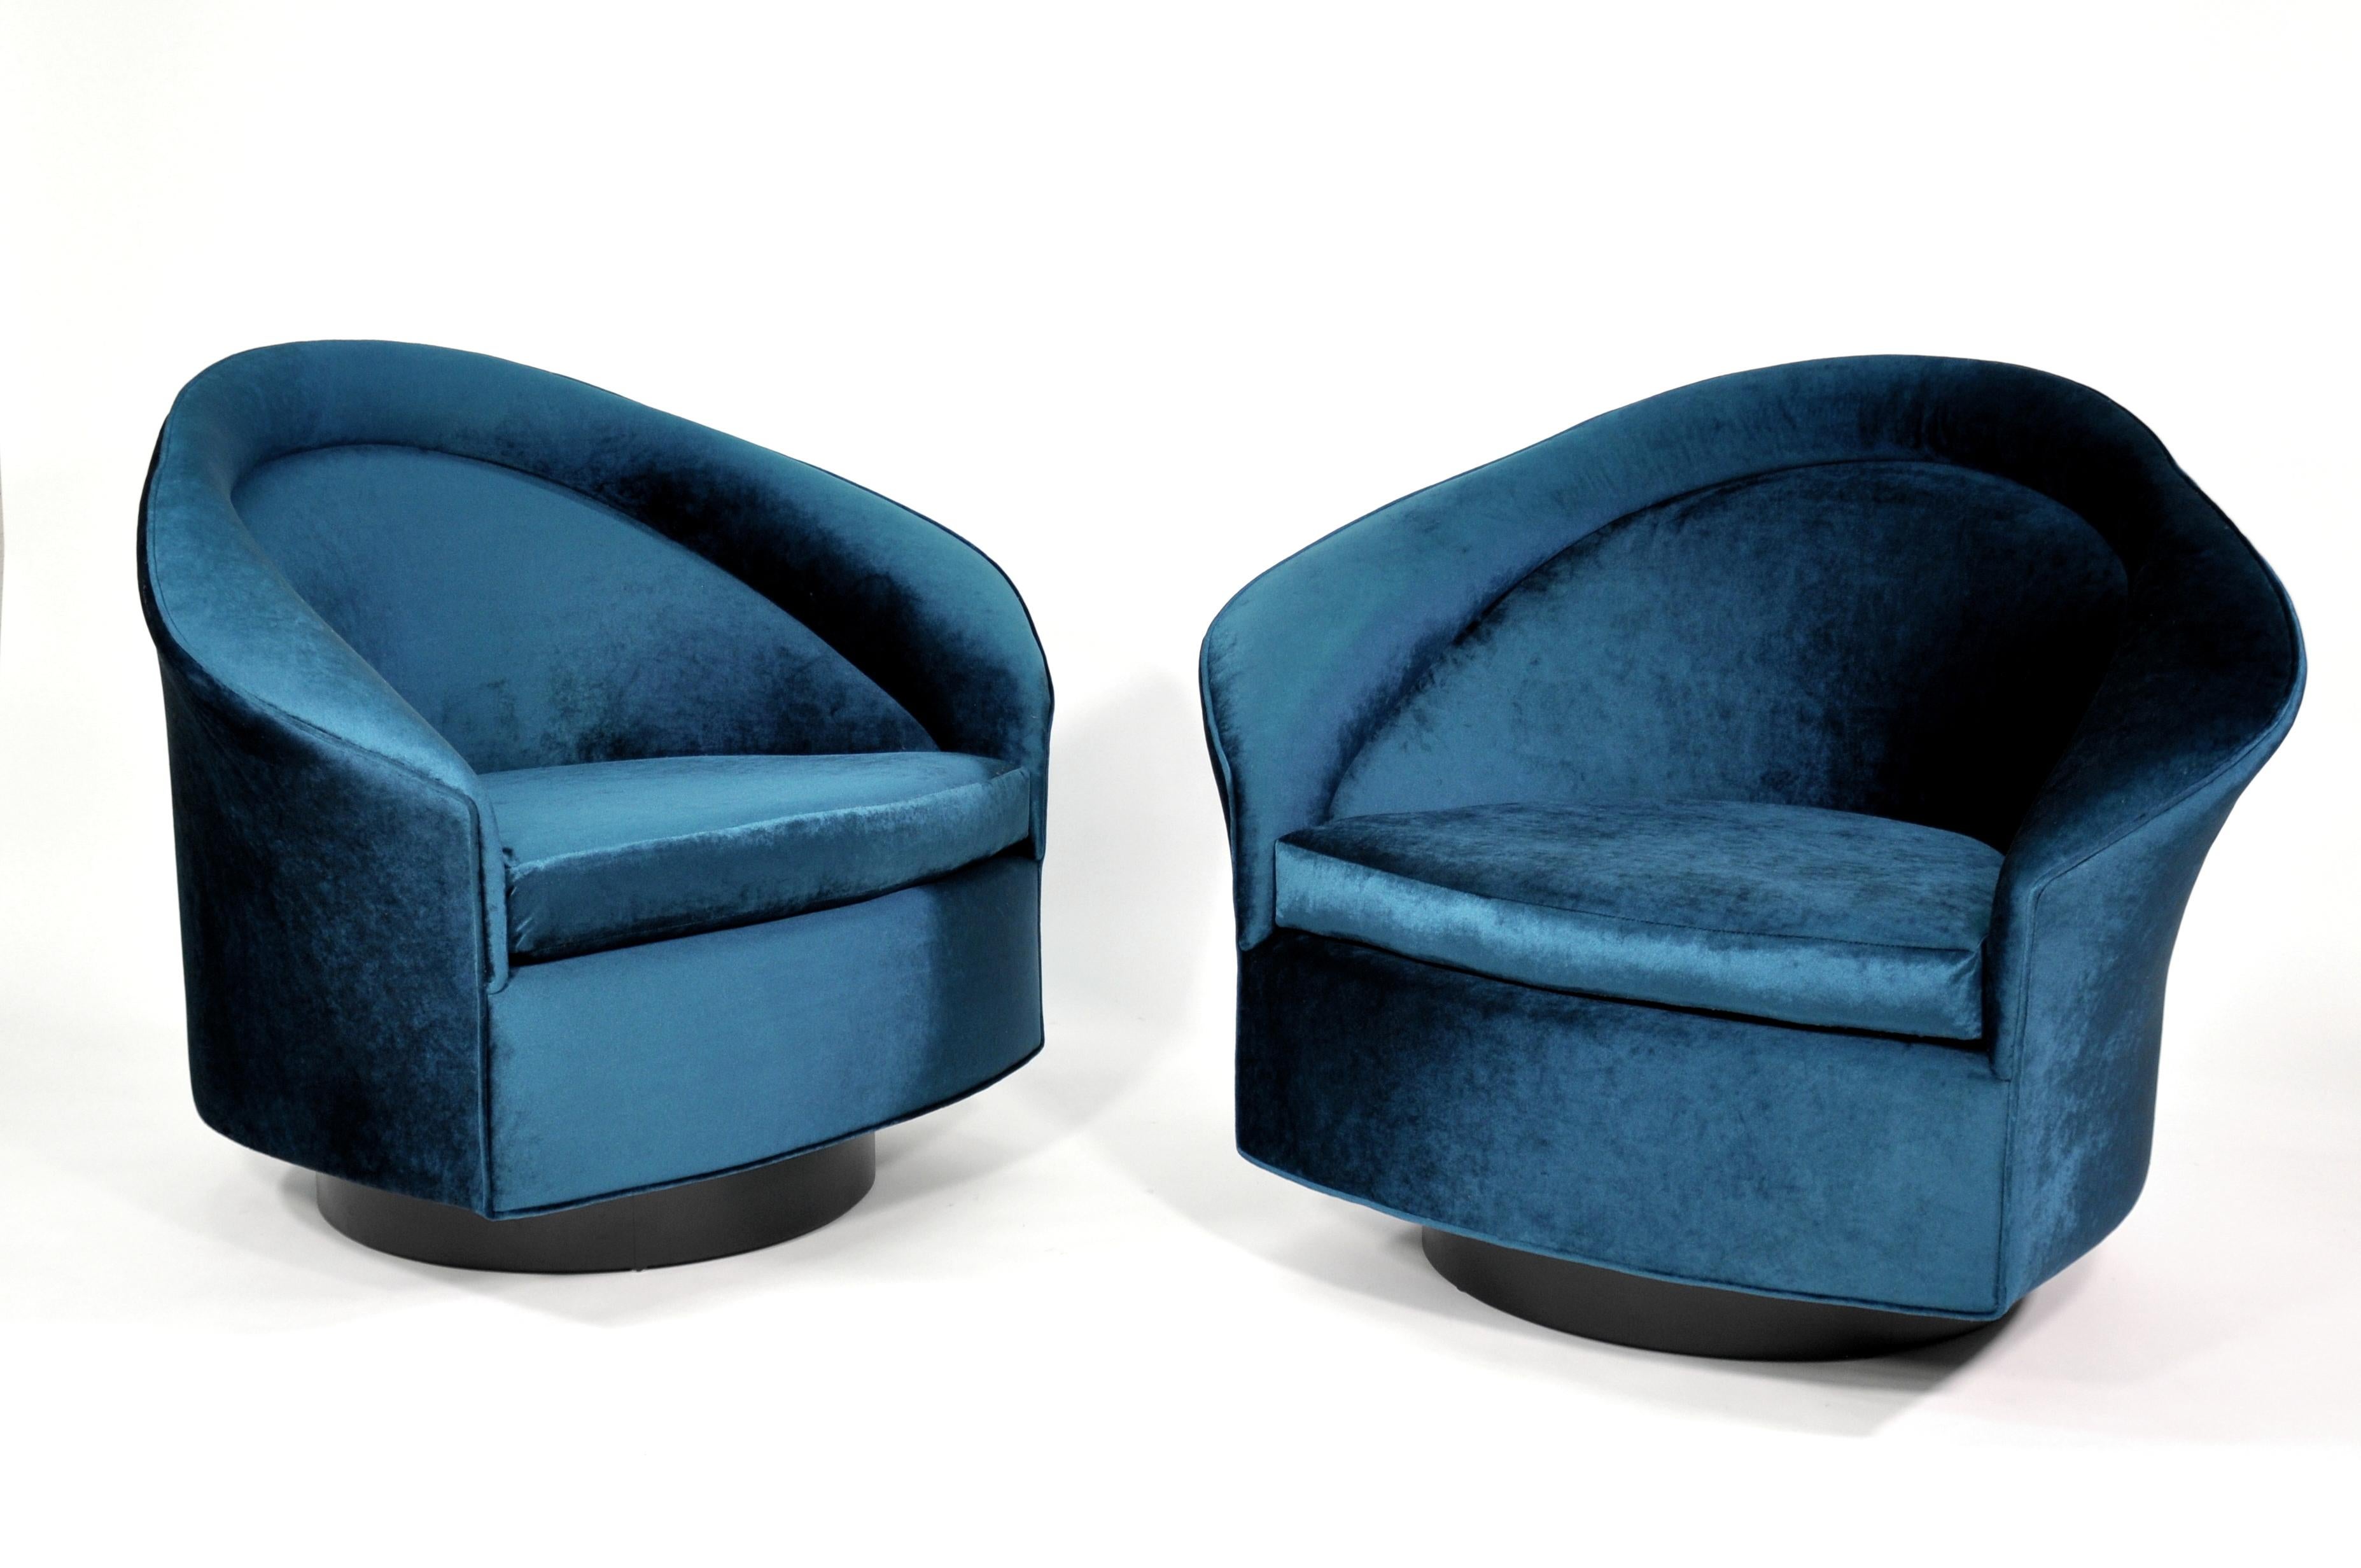 A stunning pair of Mid-Century Modern barrel back swiveling club chairs, designed by Adrian Pearsall for Craft Associates. Fully restored and upholstered in a luxurious blue jewel tone velvet, features an ebonized walnut base with swiveling and